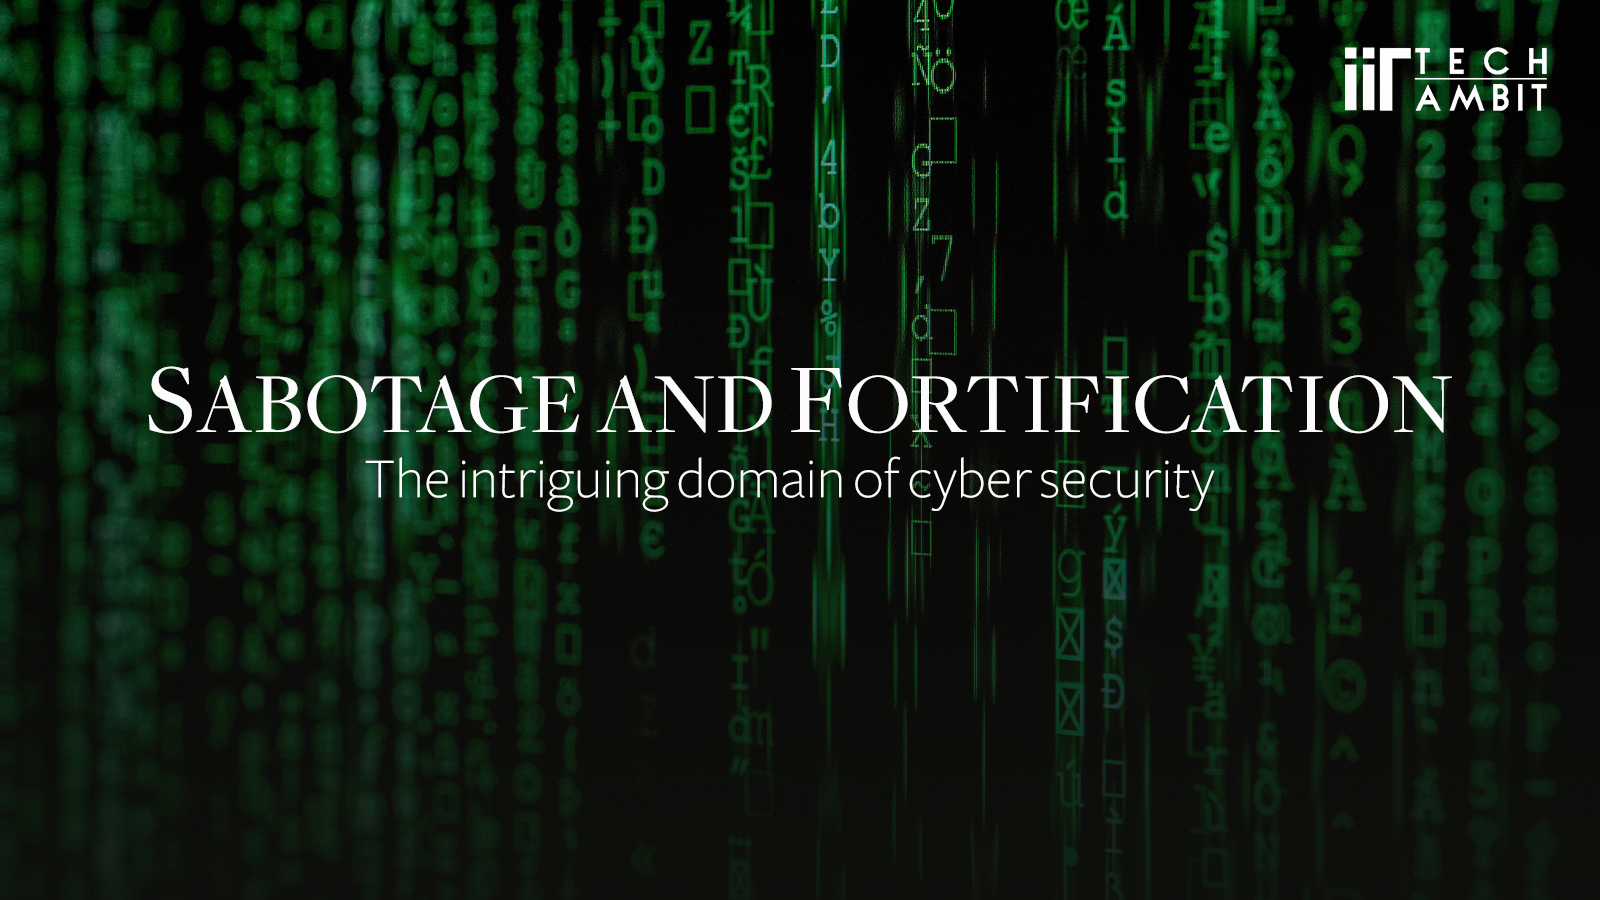 Sabotage and fortification: The intriguing domain of cybersecurity